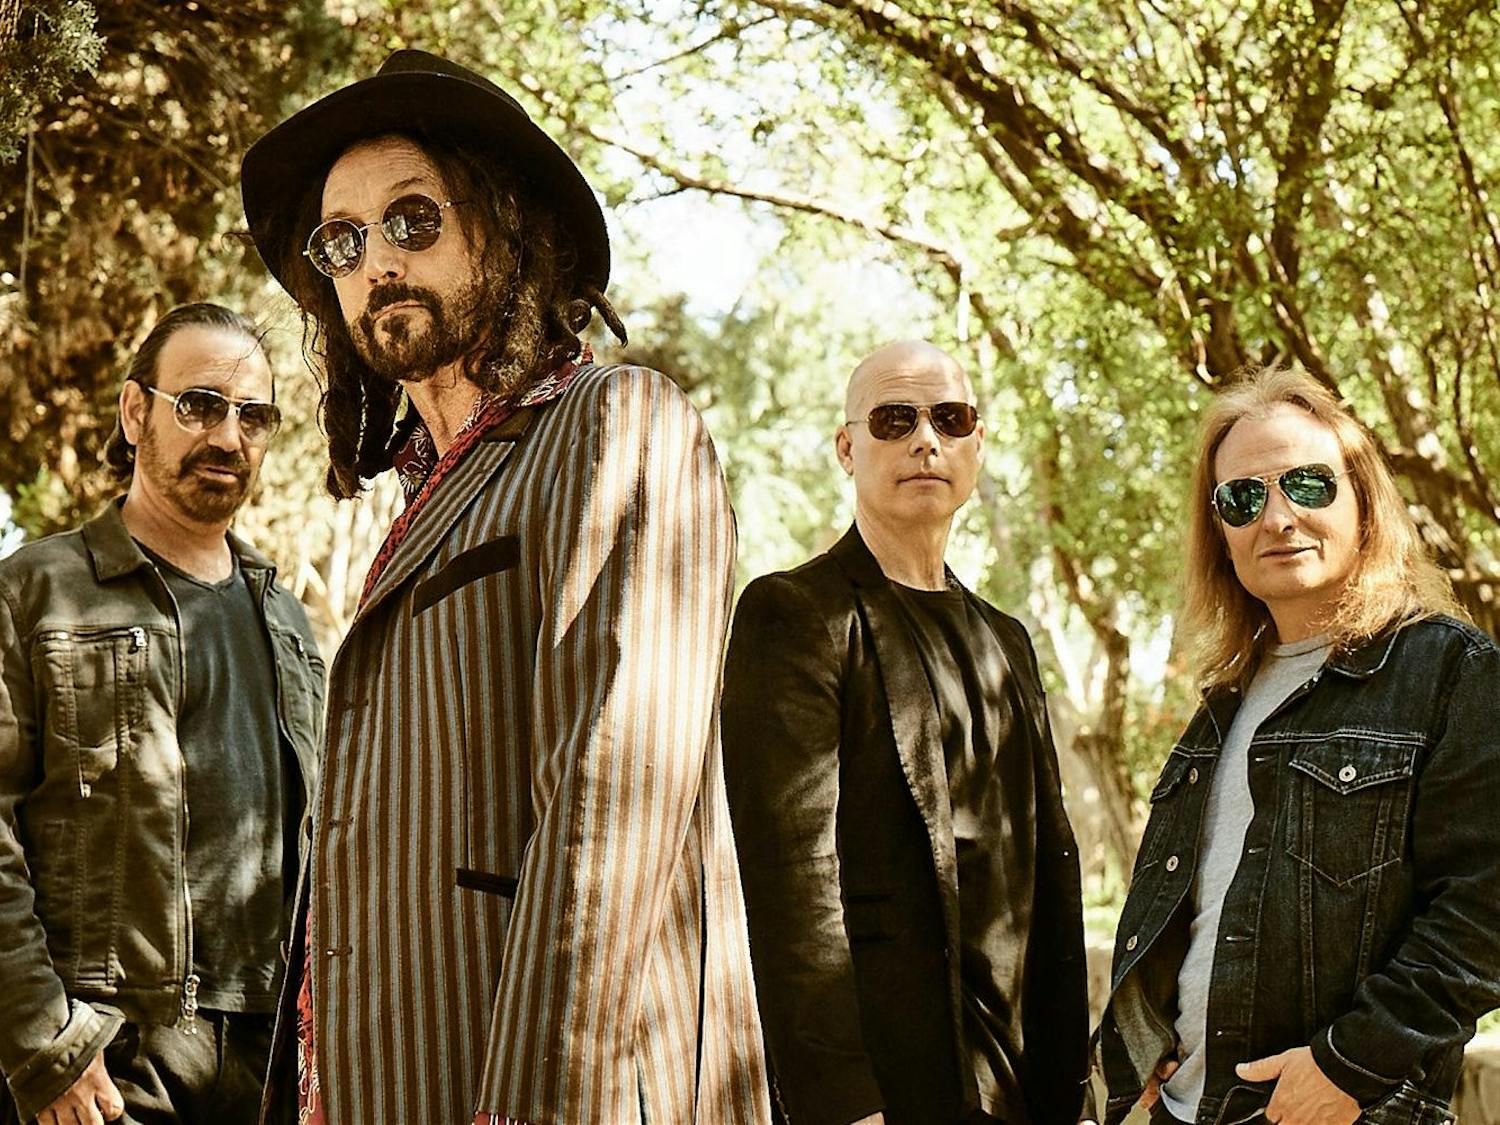 The band, featuring legendary performer Mike Campbell, is coming to the High Dive April 26.
&nbsp;